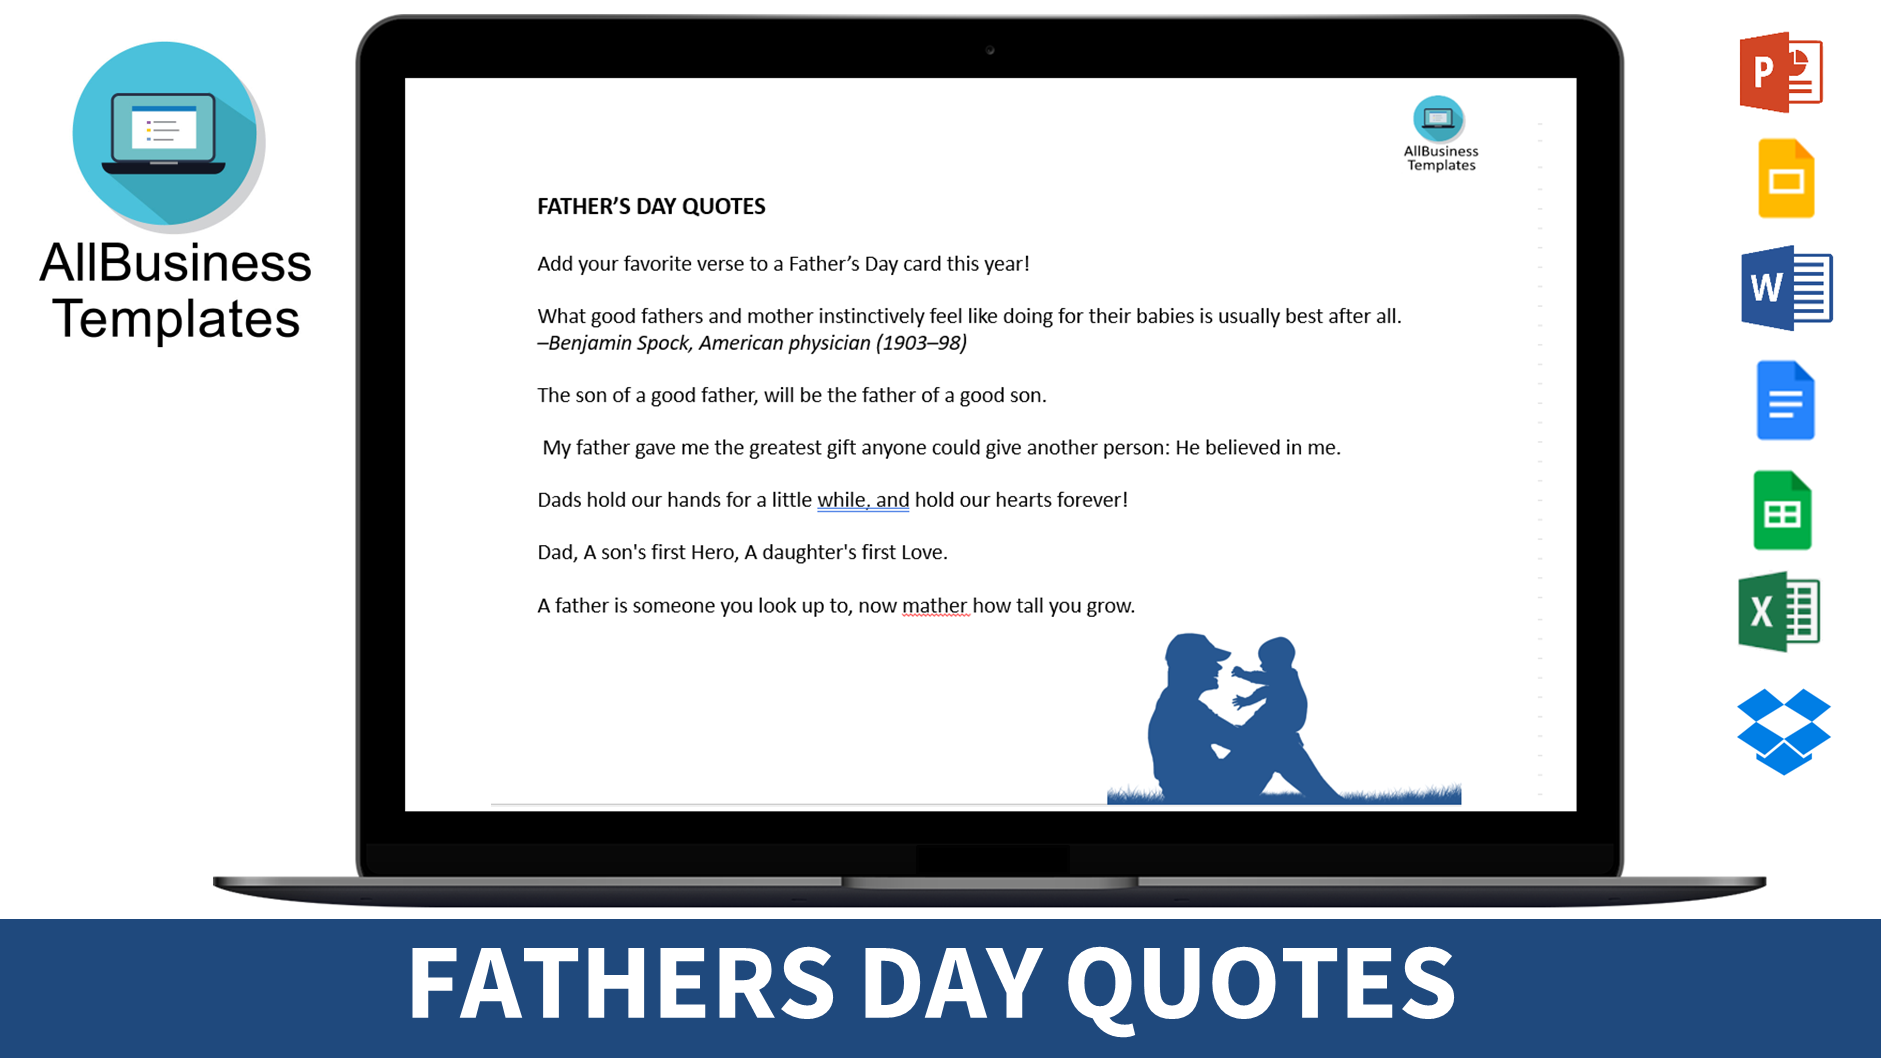 Fathersday Quotes main image